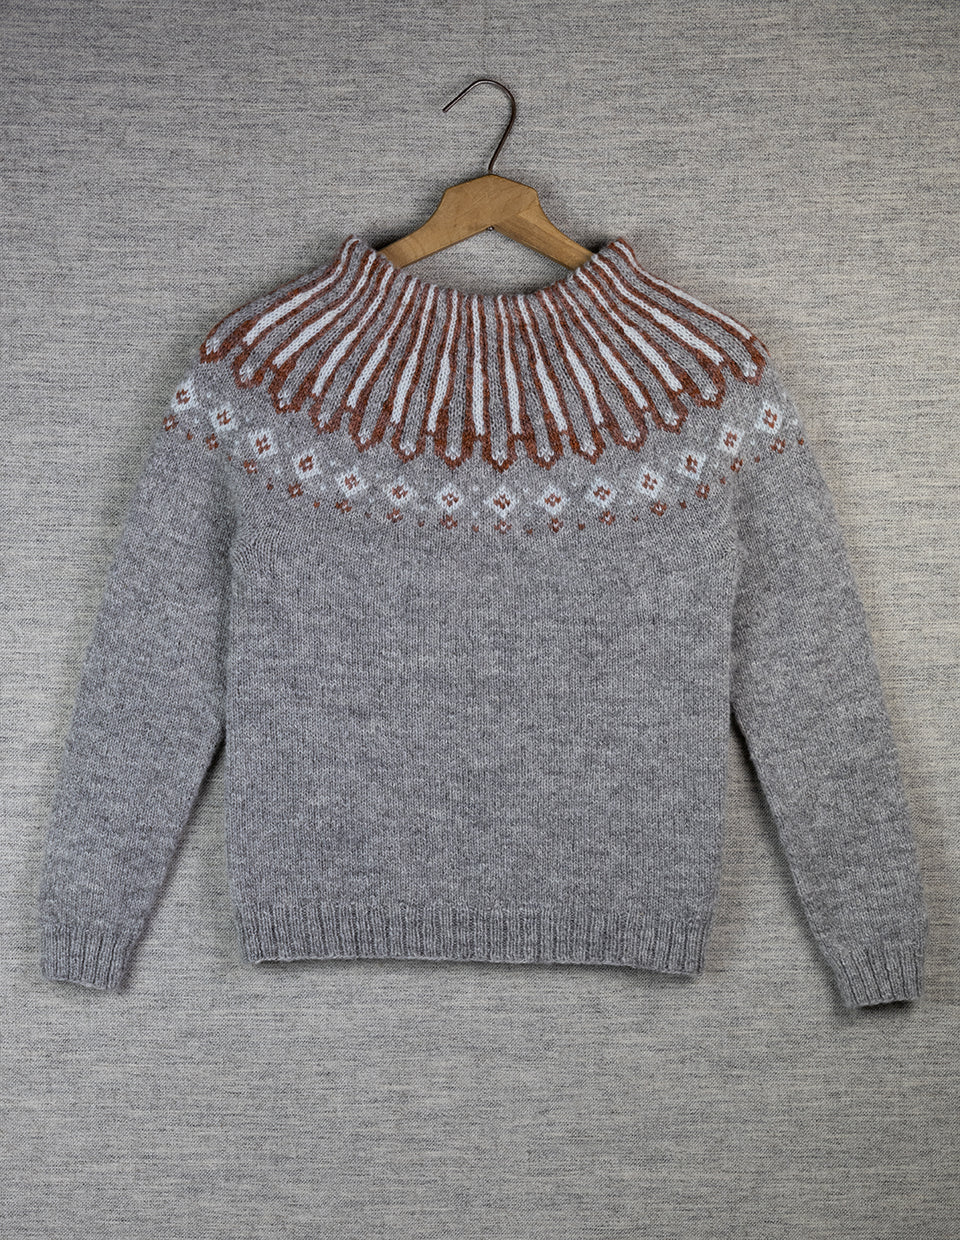 GRY, grey sweater with free choice of colour in the yoke. Size S/M